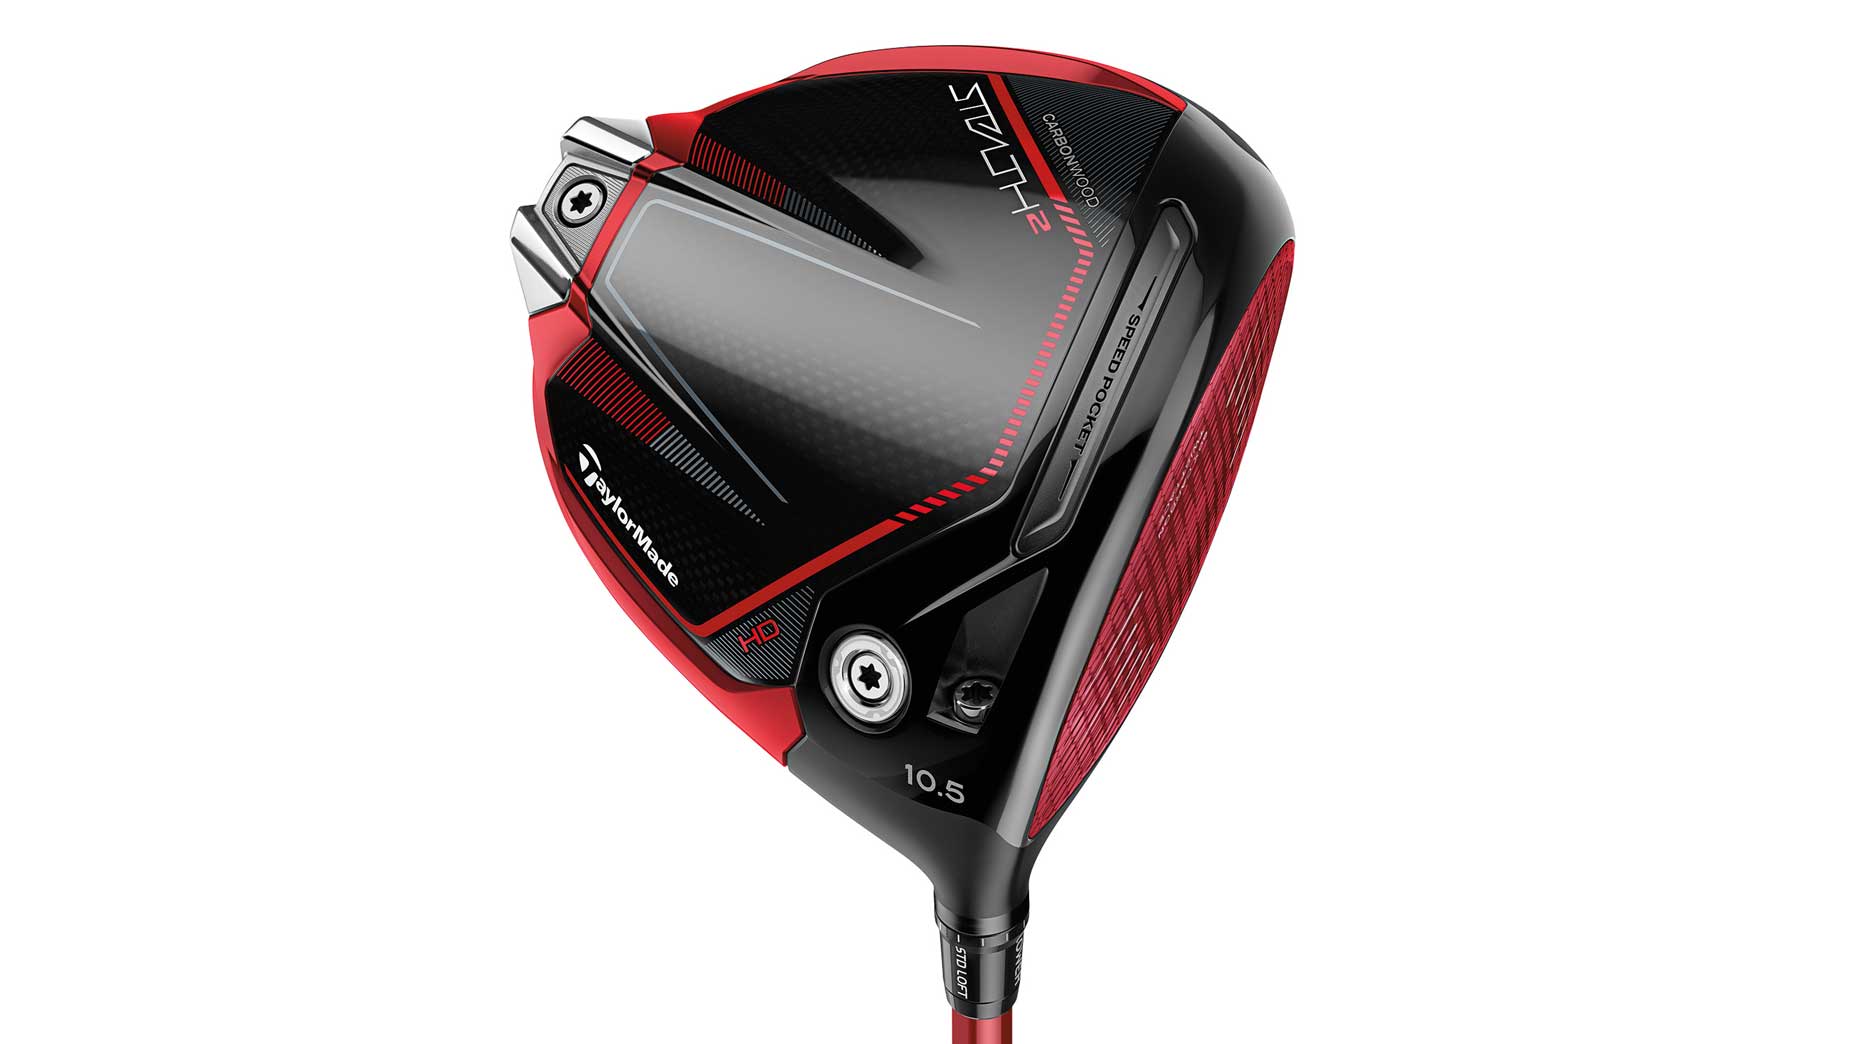 TaylorMade Stealth 2 HD driver